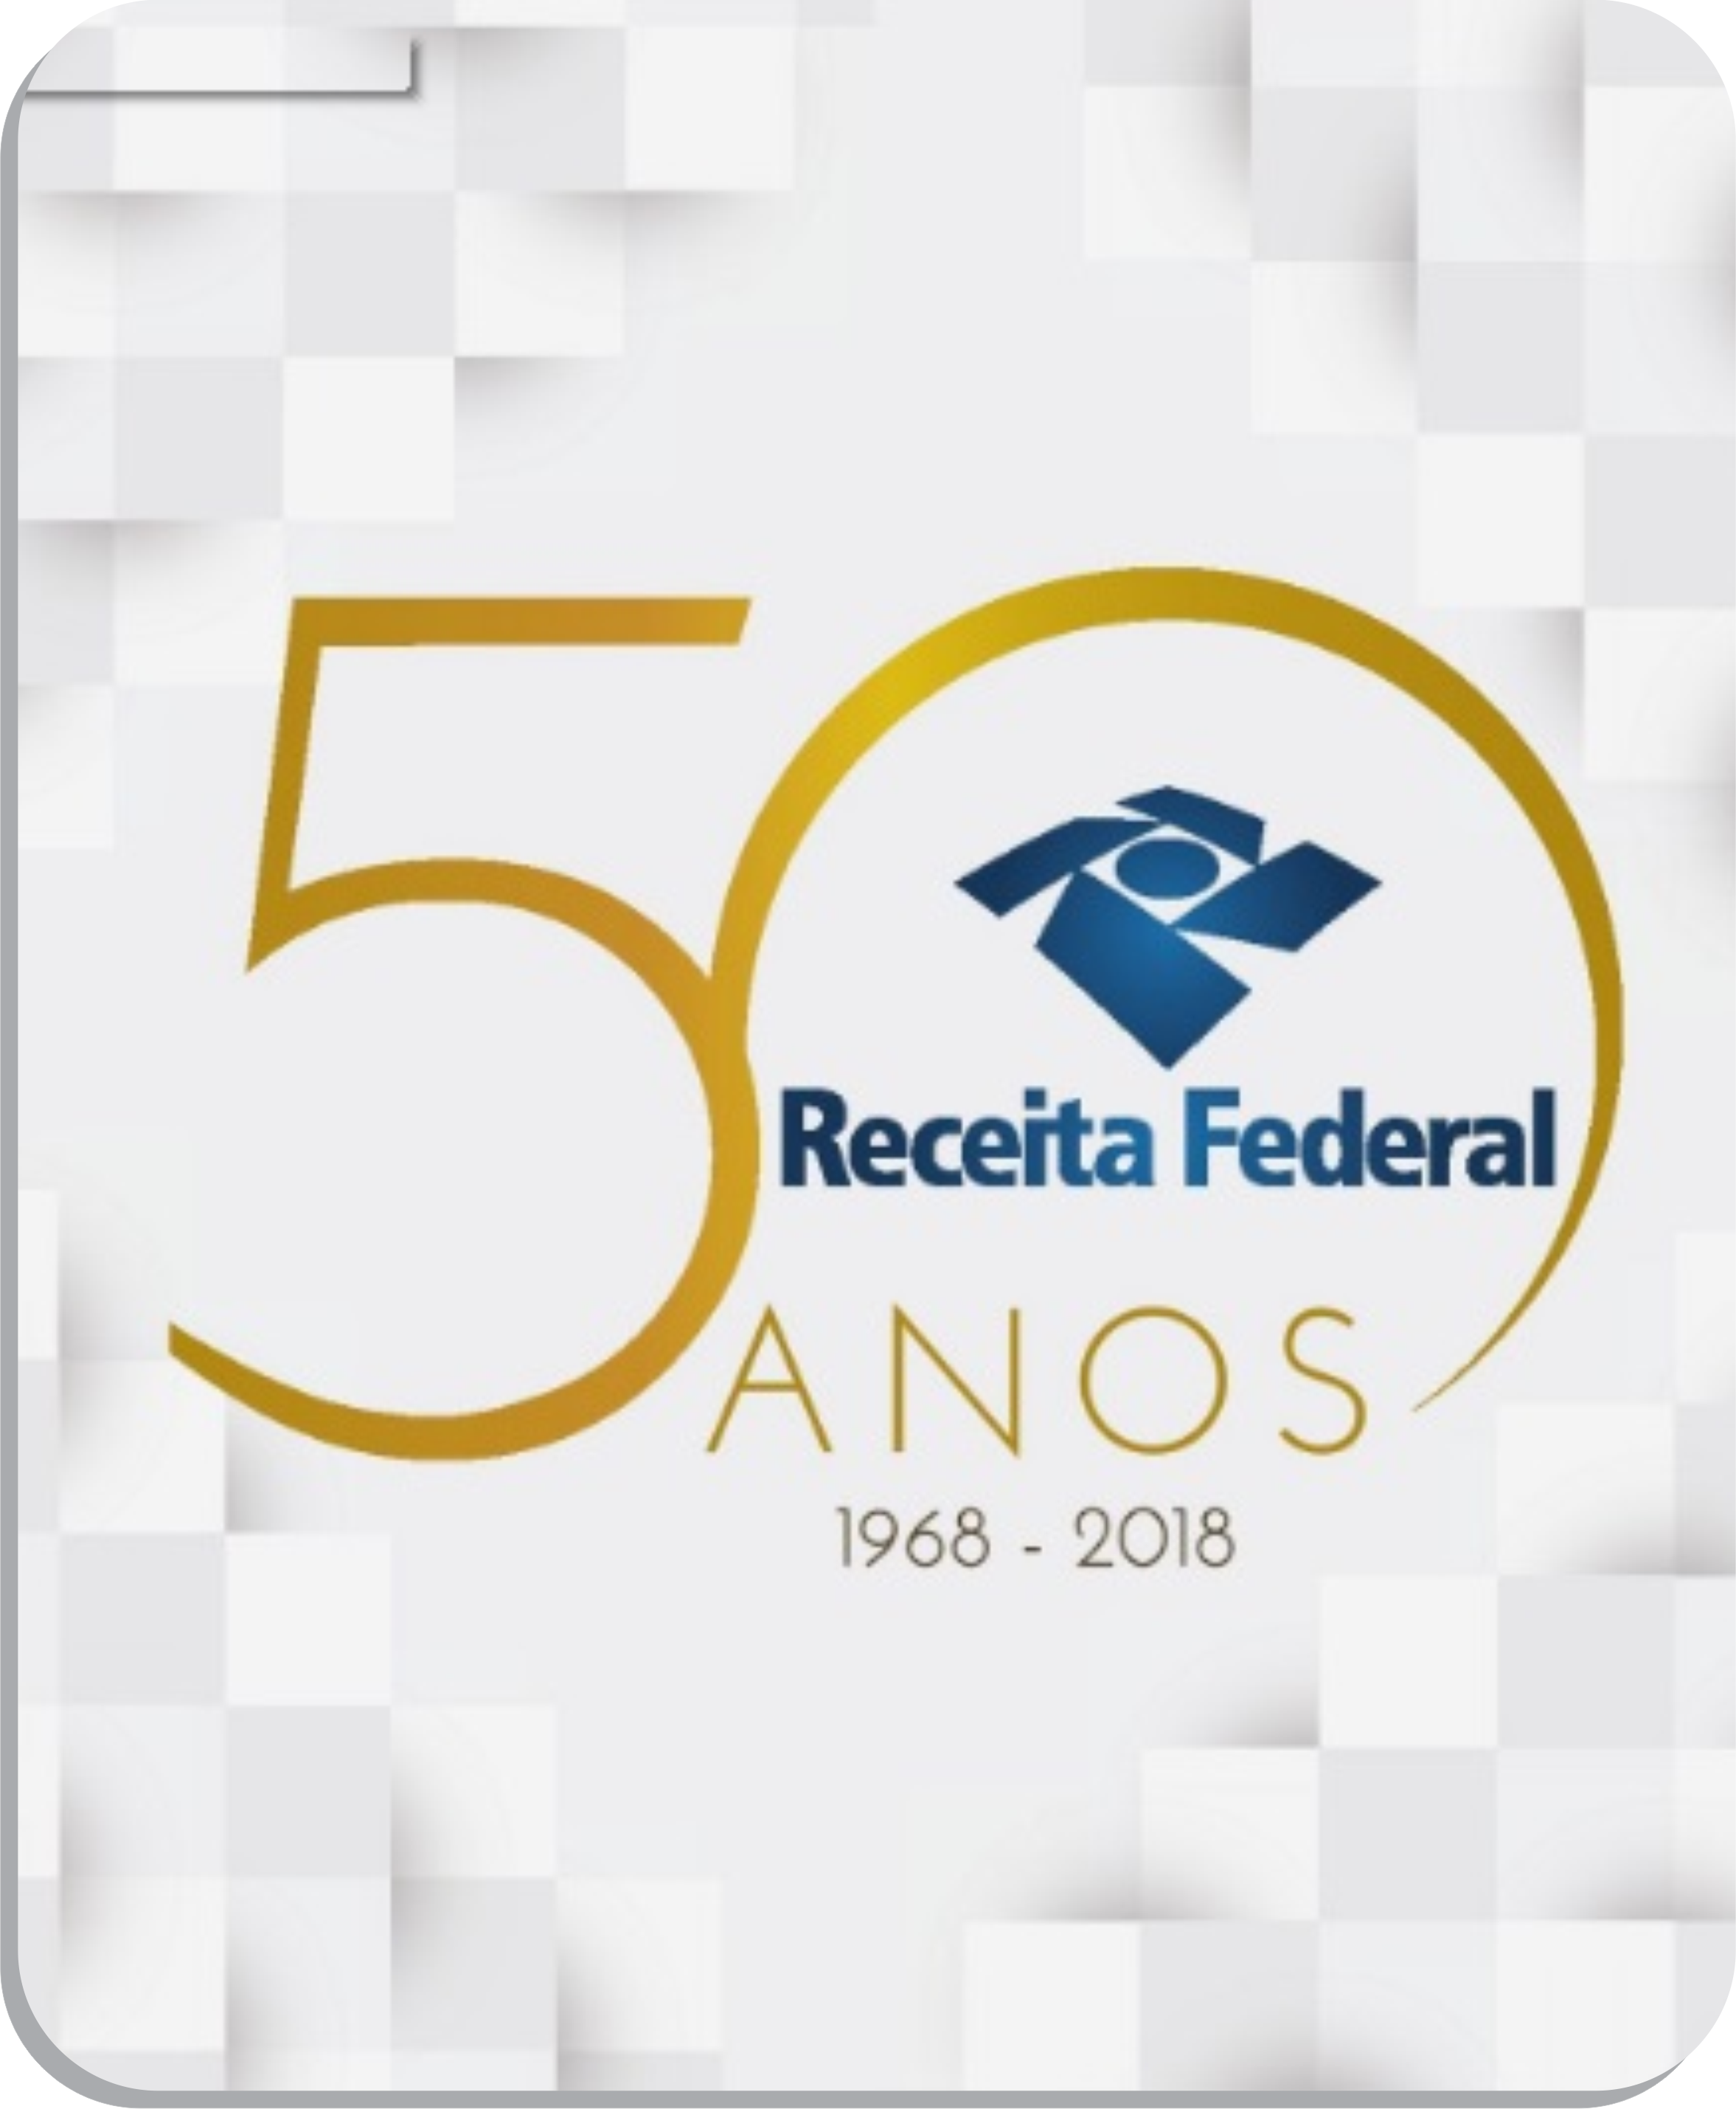 50 anos.png